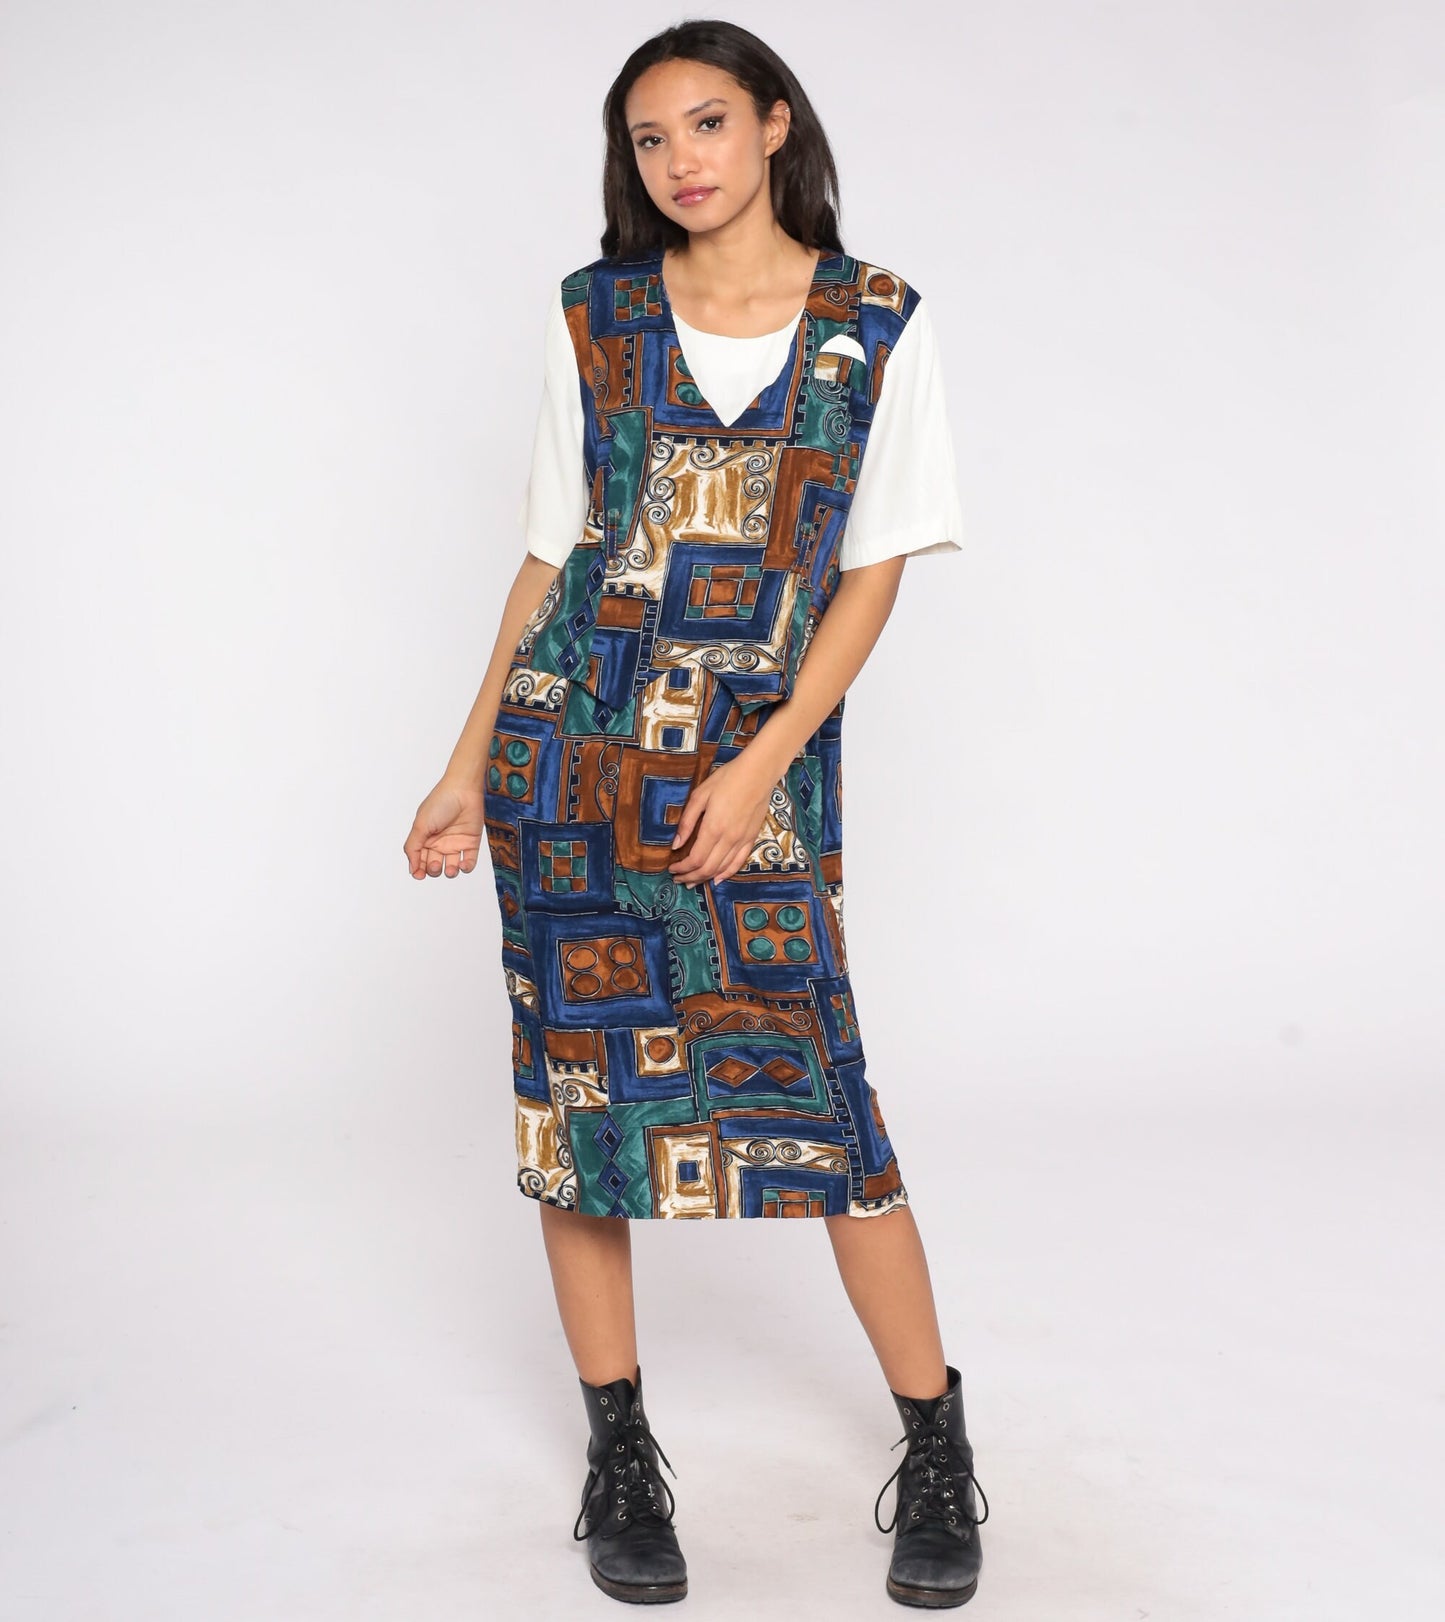 Attached Vest Dress 90s Midi Dress Brown Blue Green Abstract Print 2fer Boho Artsy Layered Grunge Bohemian Short Sleeve 1990s Large L